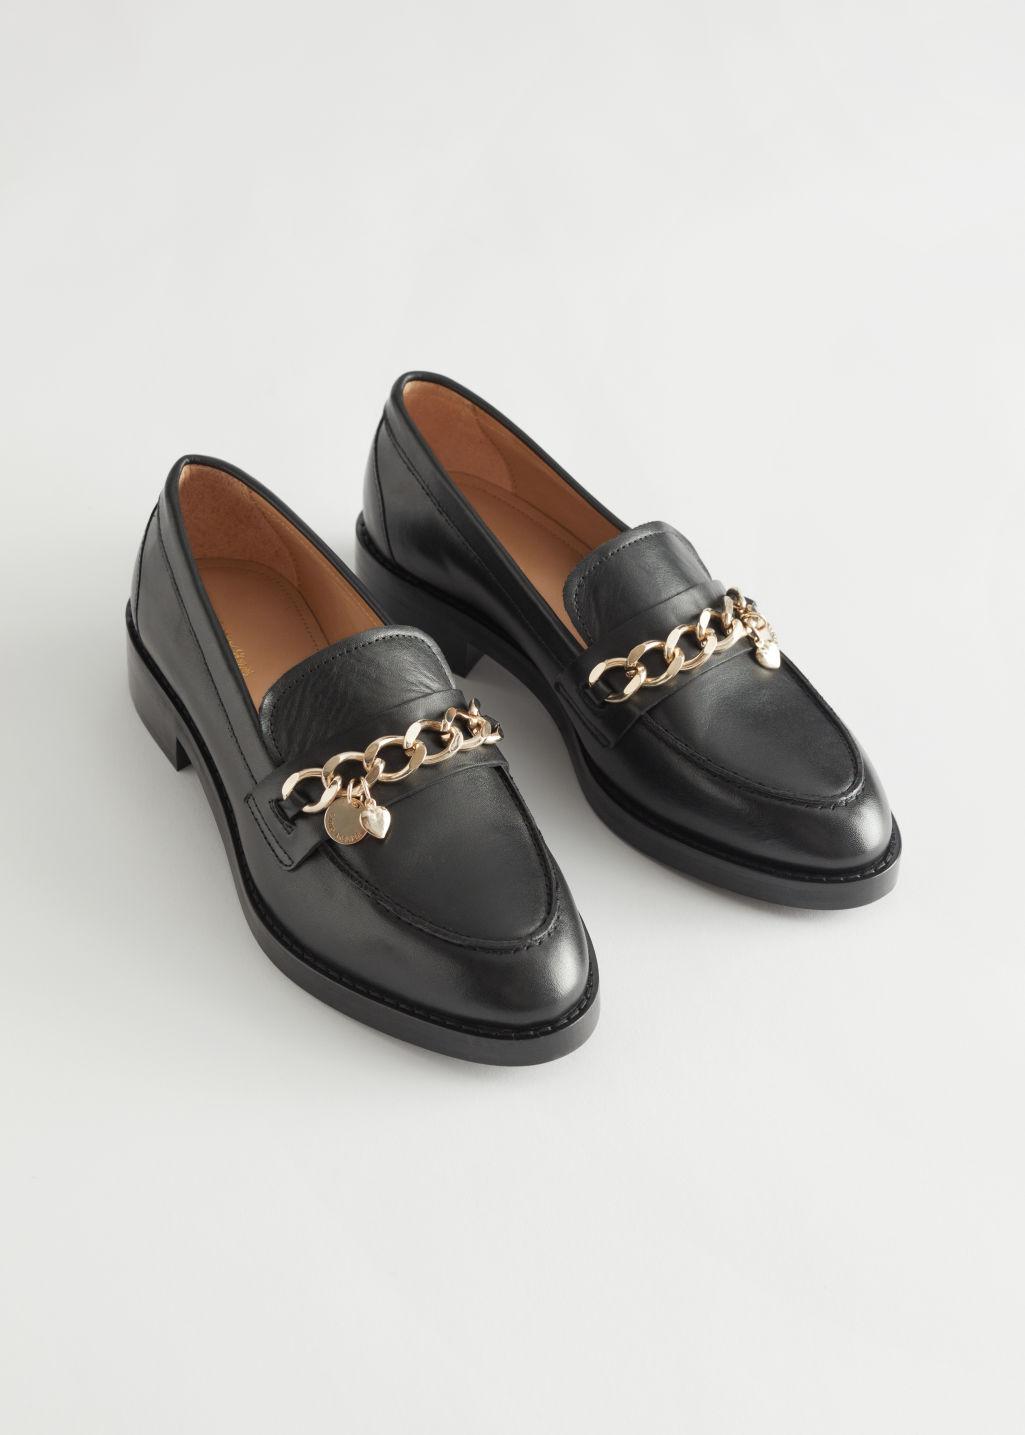 & Stories Chain Embellished Leather Loafers Lyst